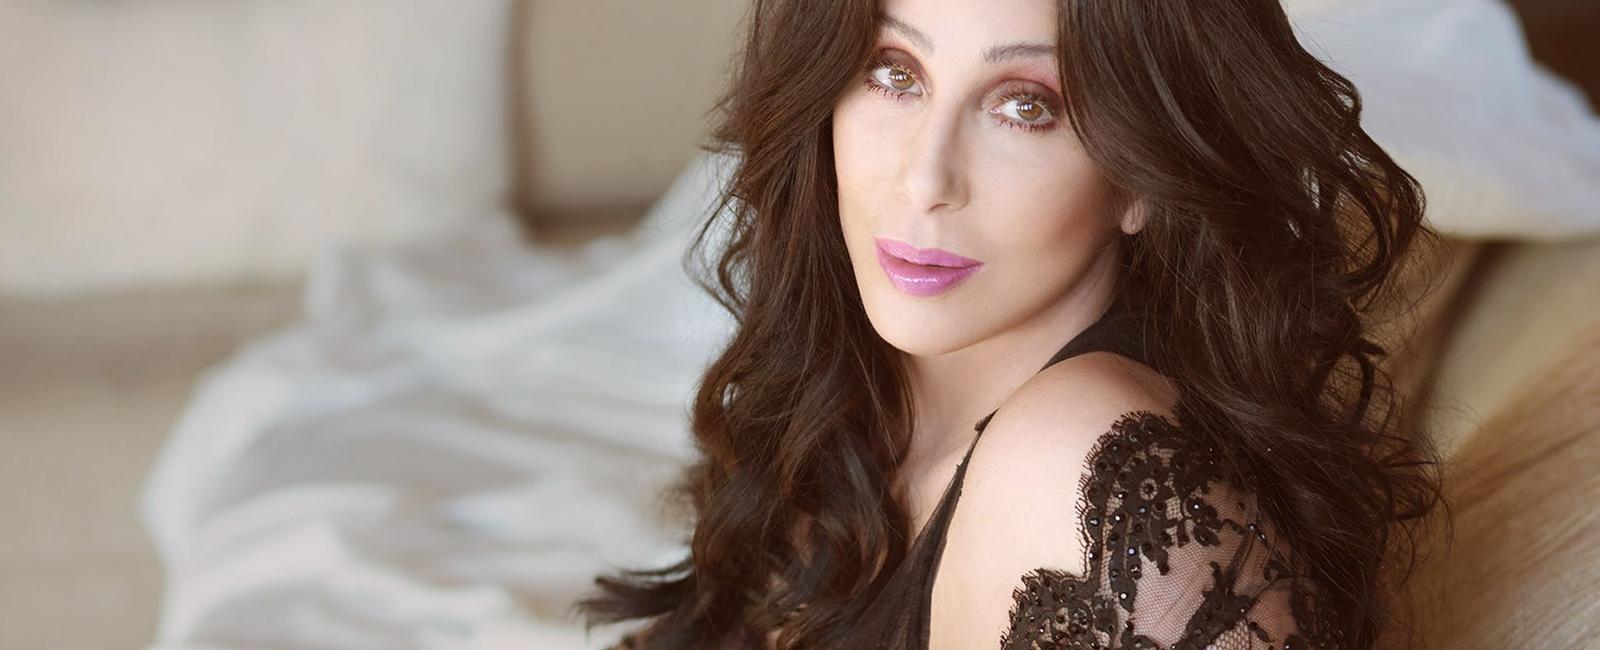 In 2011 cher became the only artist in history to have a number one song on the billboard chart for six consecutive decades